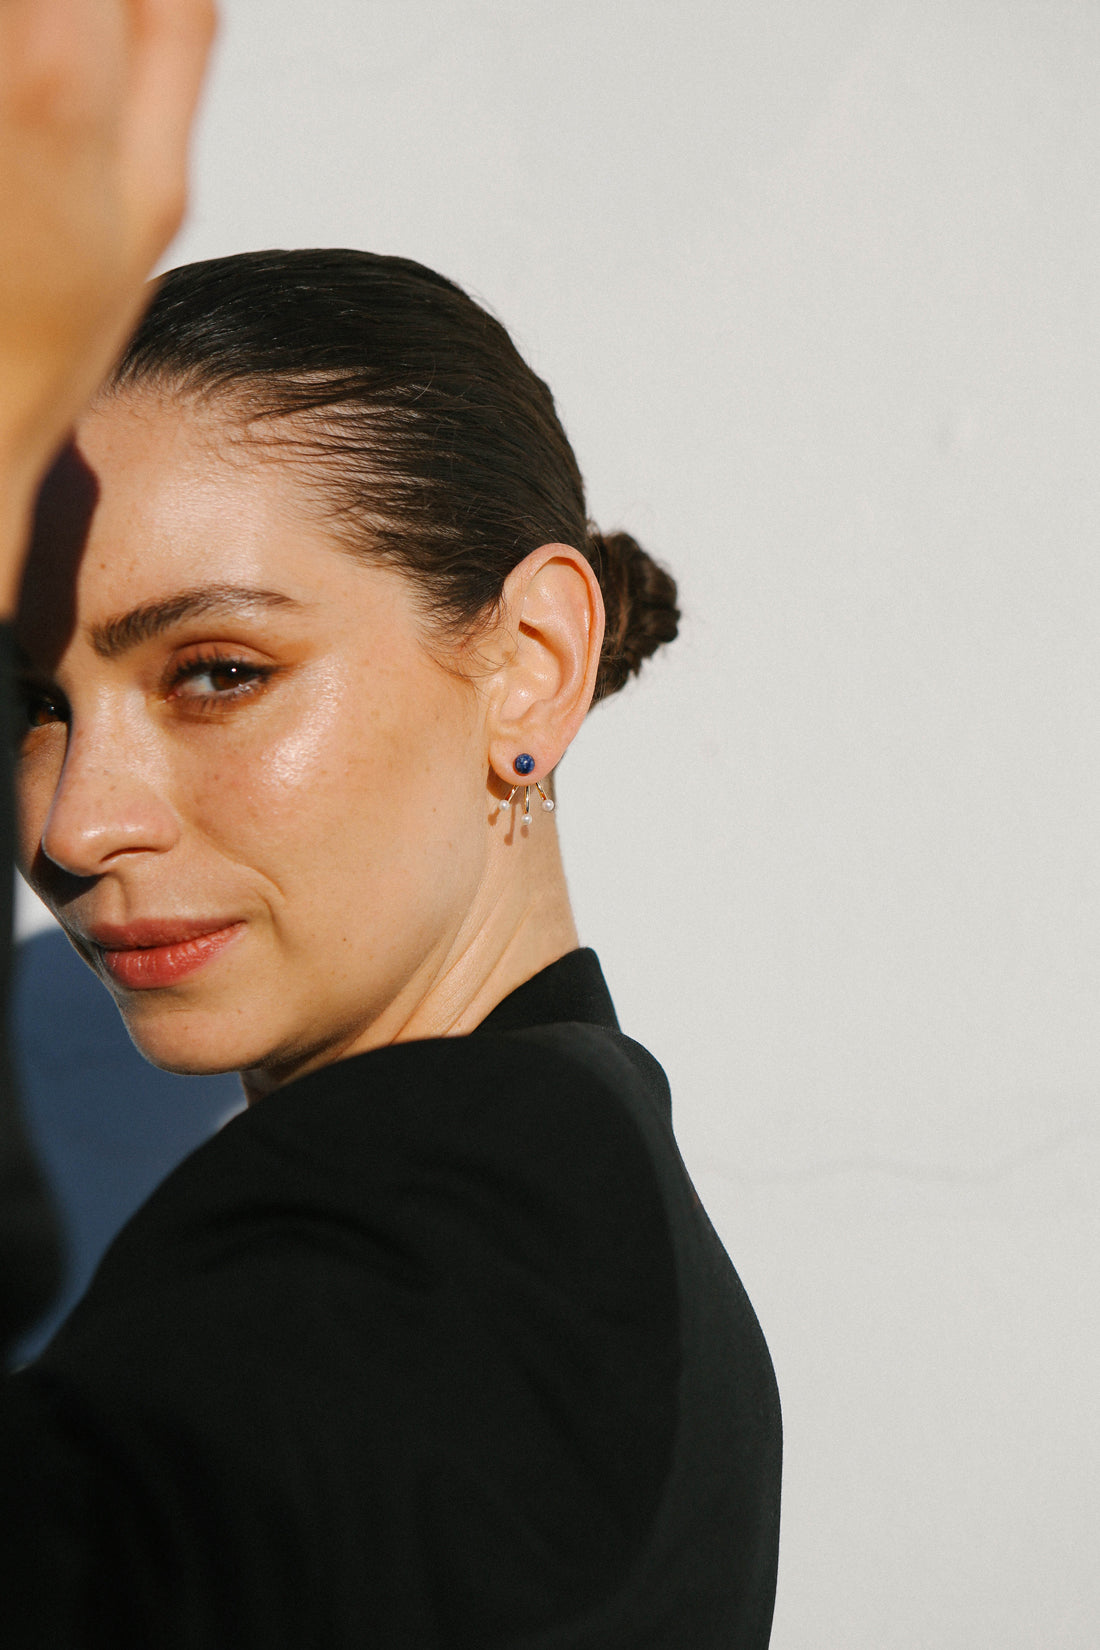 Model wears a black jacket and holds one arm up, which casts a slight shadow on her face. The feature is a single earring of three pearls and one blue stone stud.